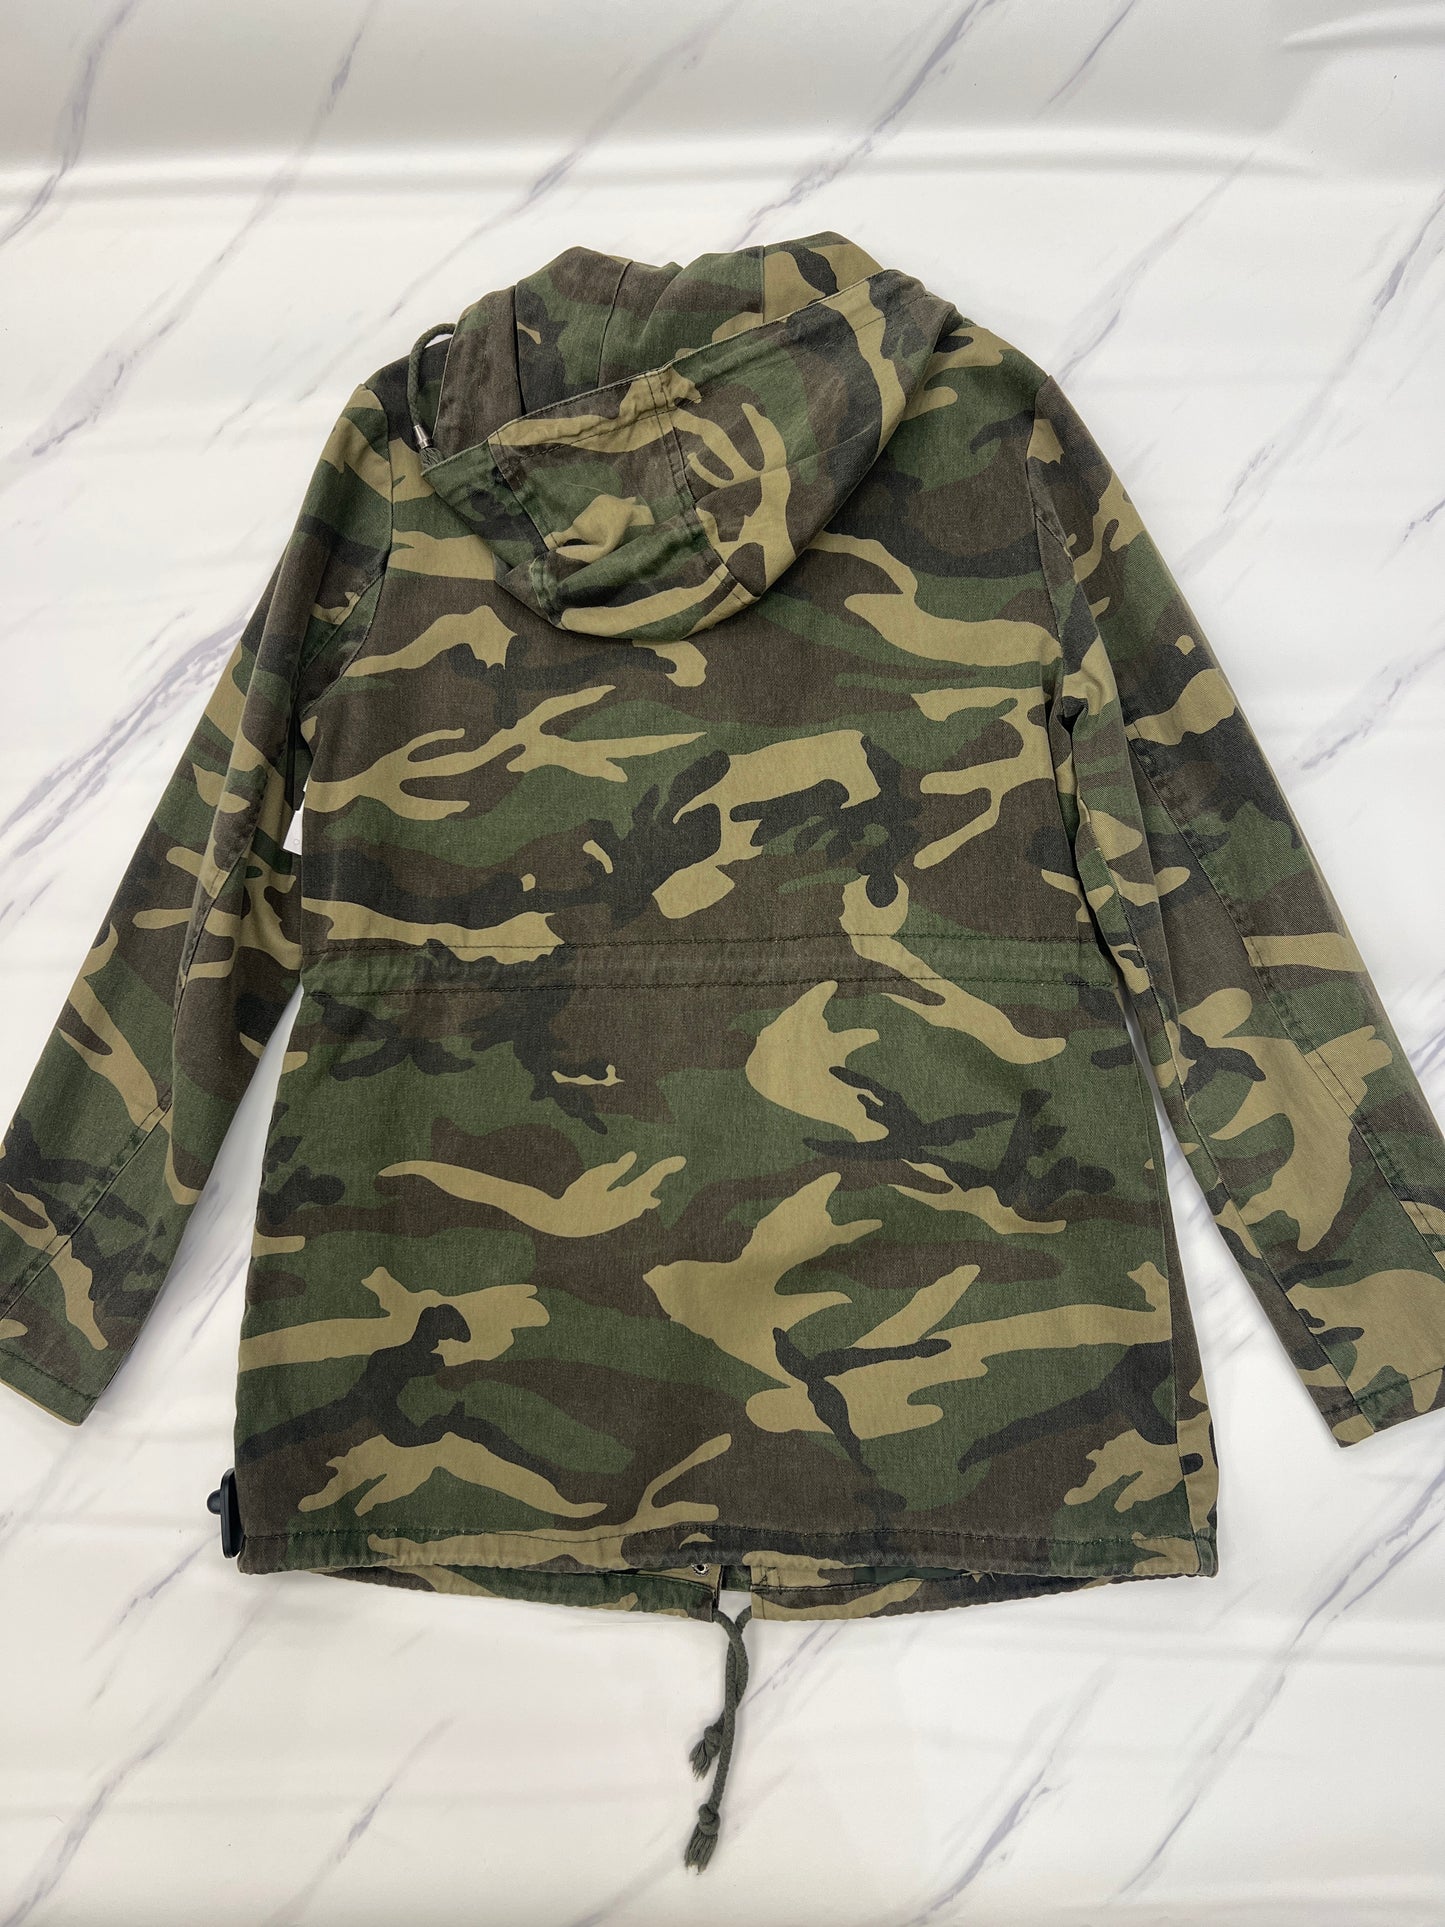 Jacket Utility By Clothes Mentor  Size: S